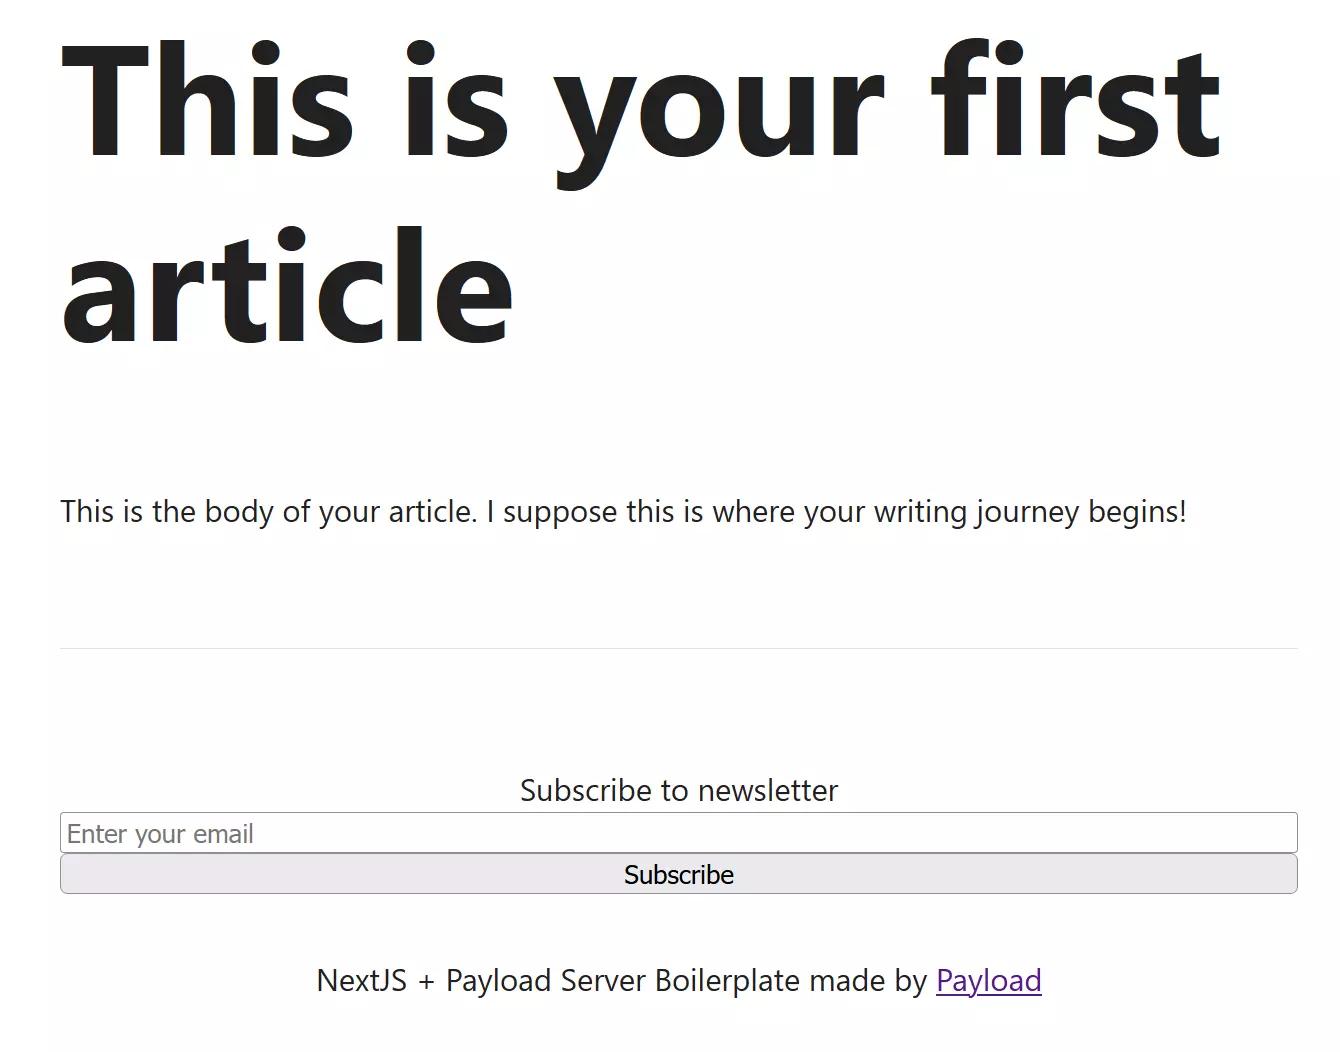 A newsletter registration component is added to the article.